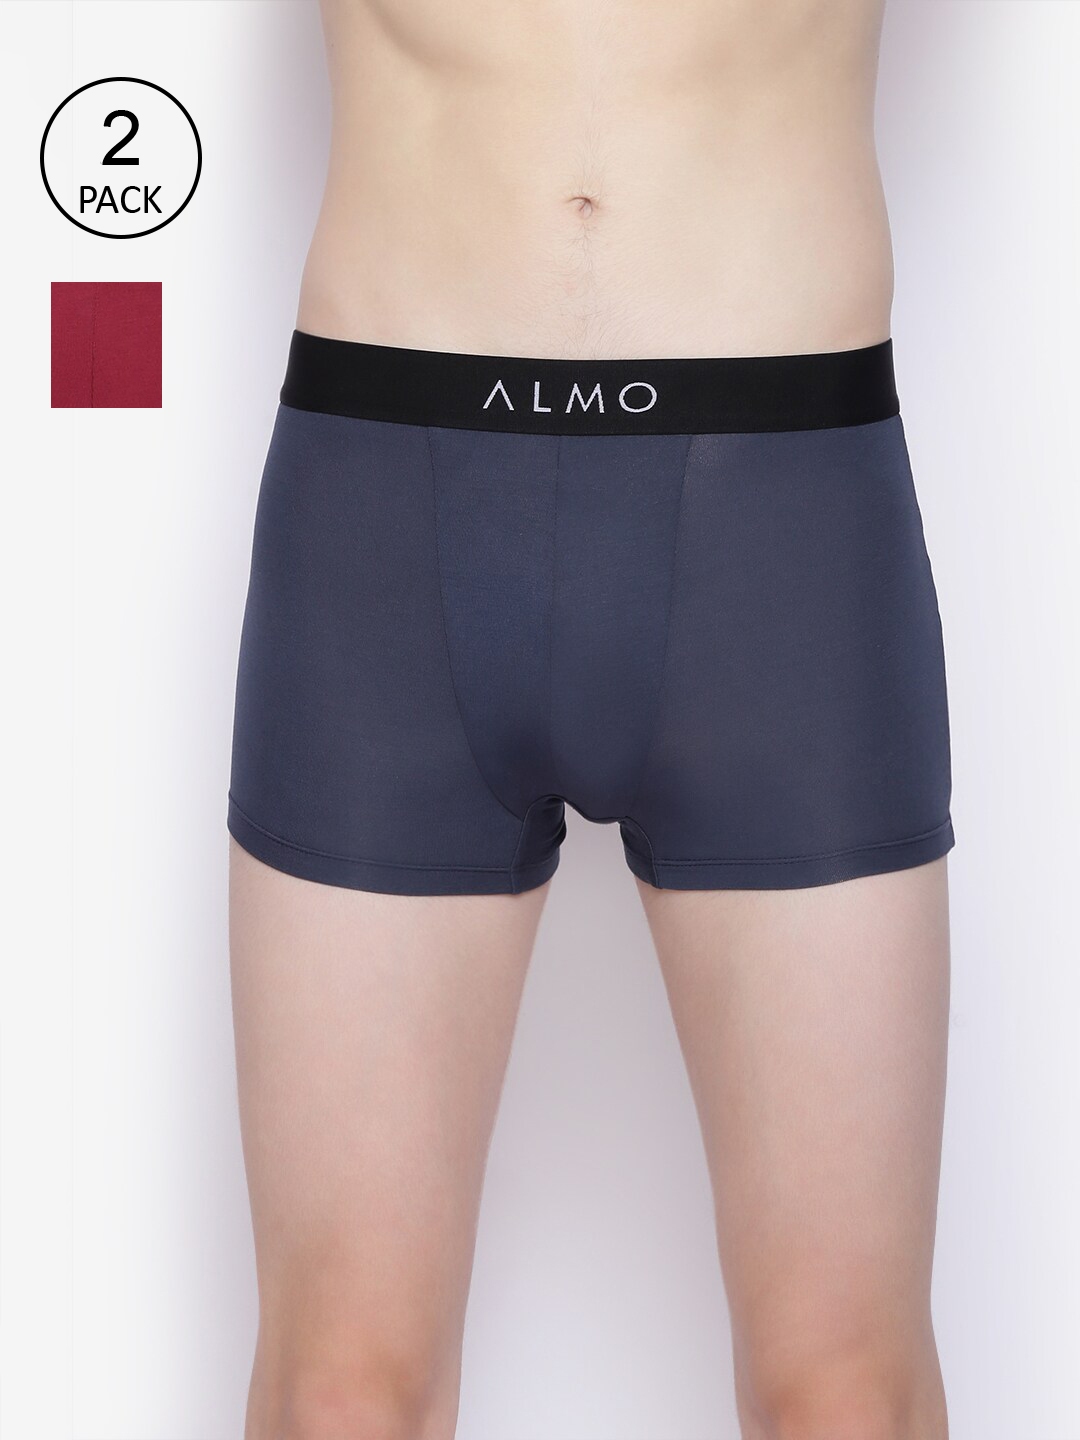 Enhanced Dual Pouch Bamboo Boxer Bamboo Underwear Eco Friendly